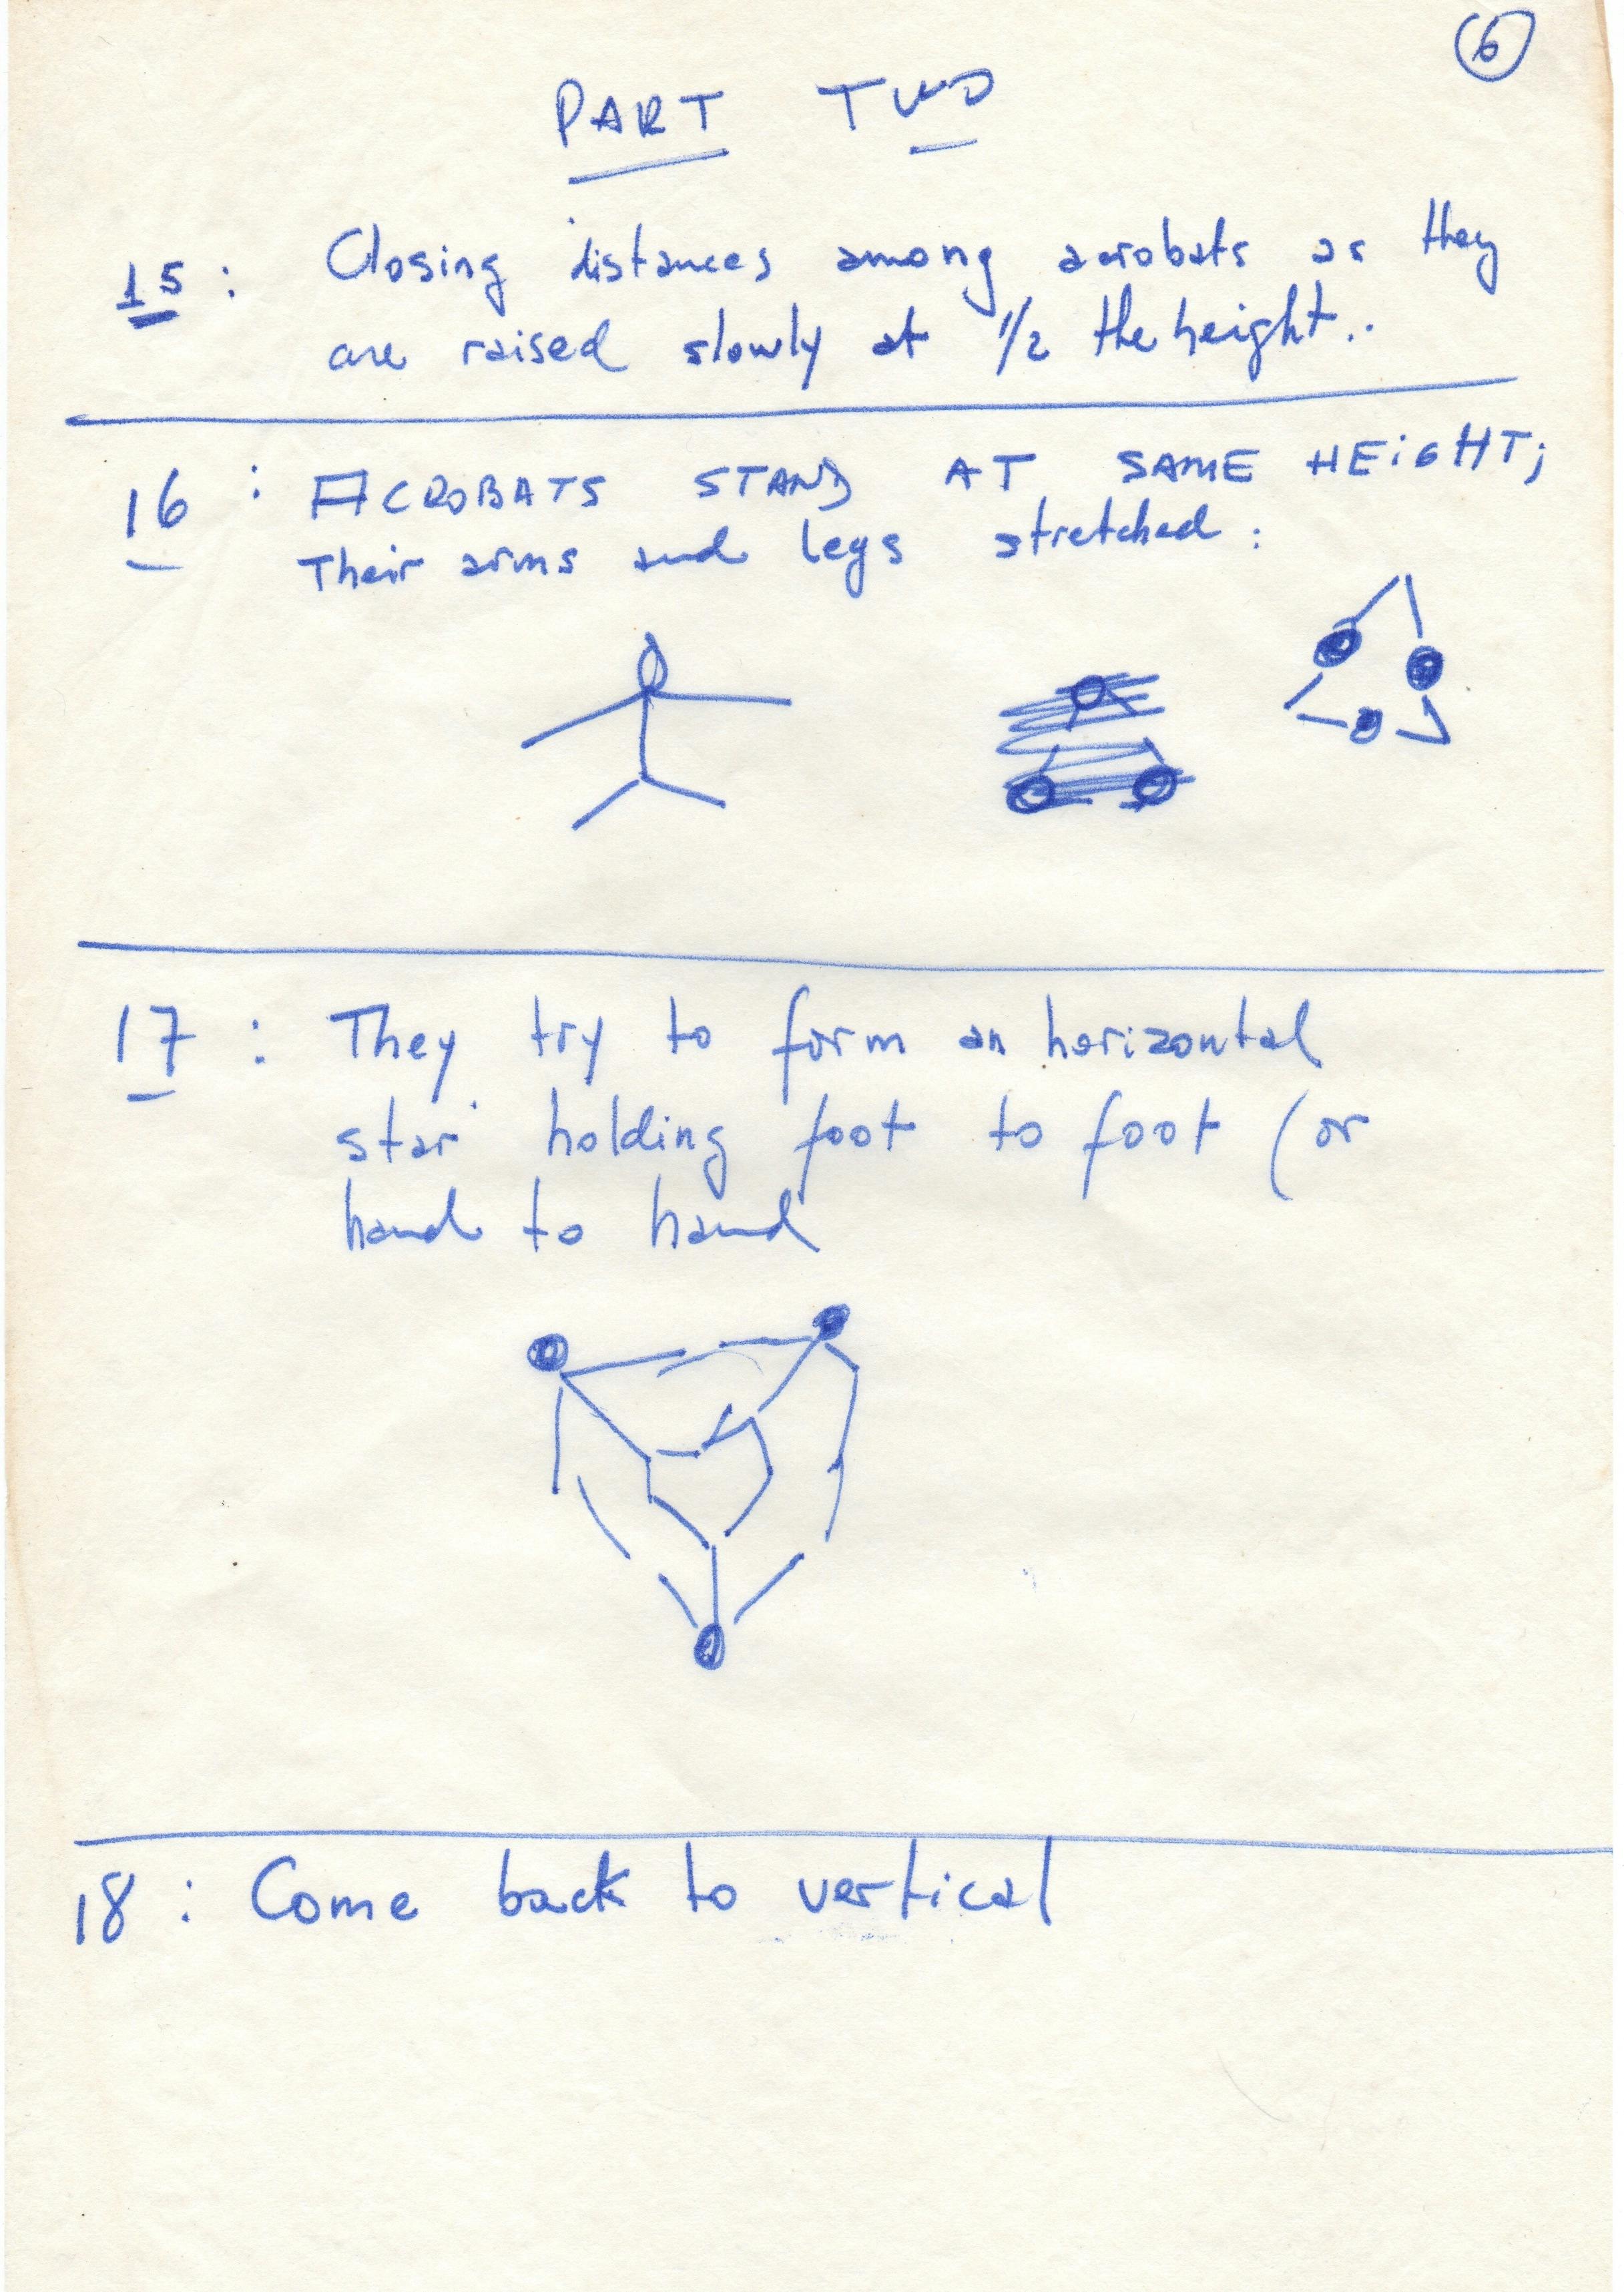 The image shows a sheet of paper marked in blue ink with handwriting and preparatory drawings by Leopoldo Maler. In the upper-right corner, the sheet is hand-numbered “6.” The page’s heading reads, “Part Two,” with quick sketches of stick figures interspersing the following directions:   “15: Closing distances among acrobats as they are raised slowly at ½ the height.   “16: ACROBATS STAND AT SAME HEIGHT; Their arms and legs stretched.   “17: They try to form a horizontal star holding foot to foot (or hand to hand   “18. Come back to vertical.”